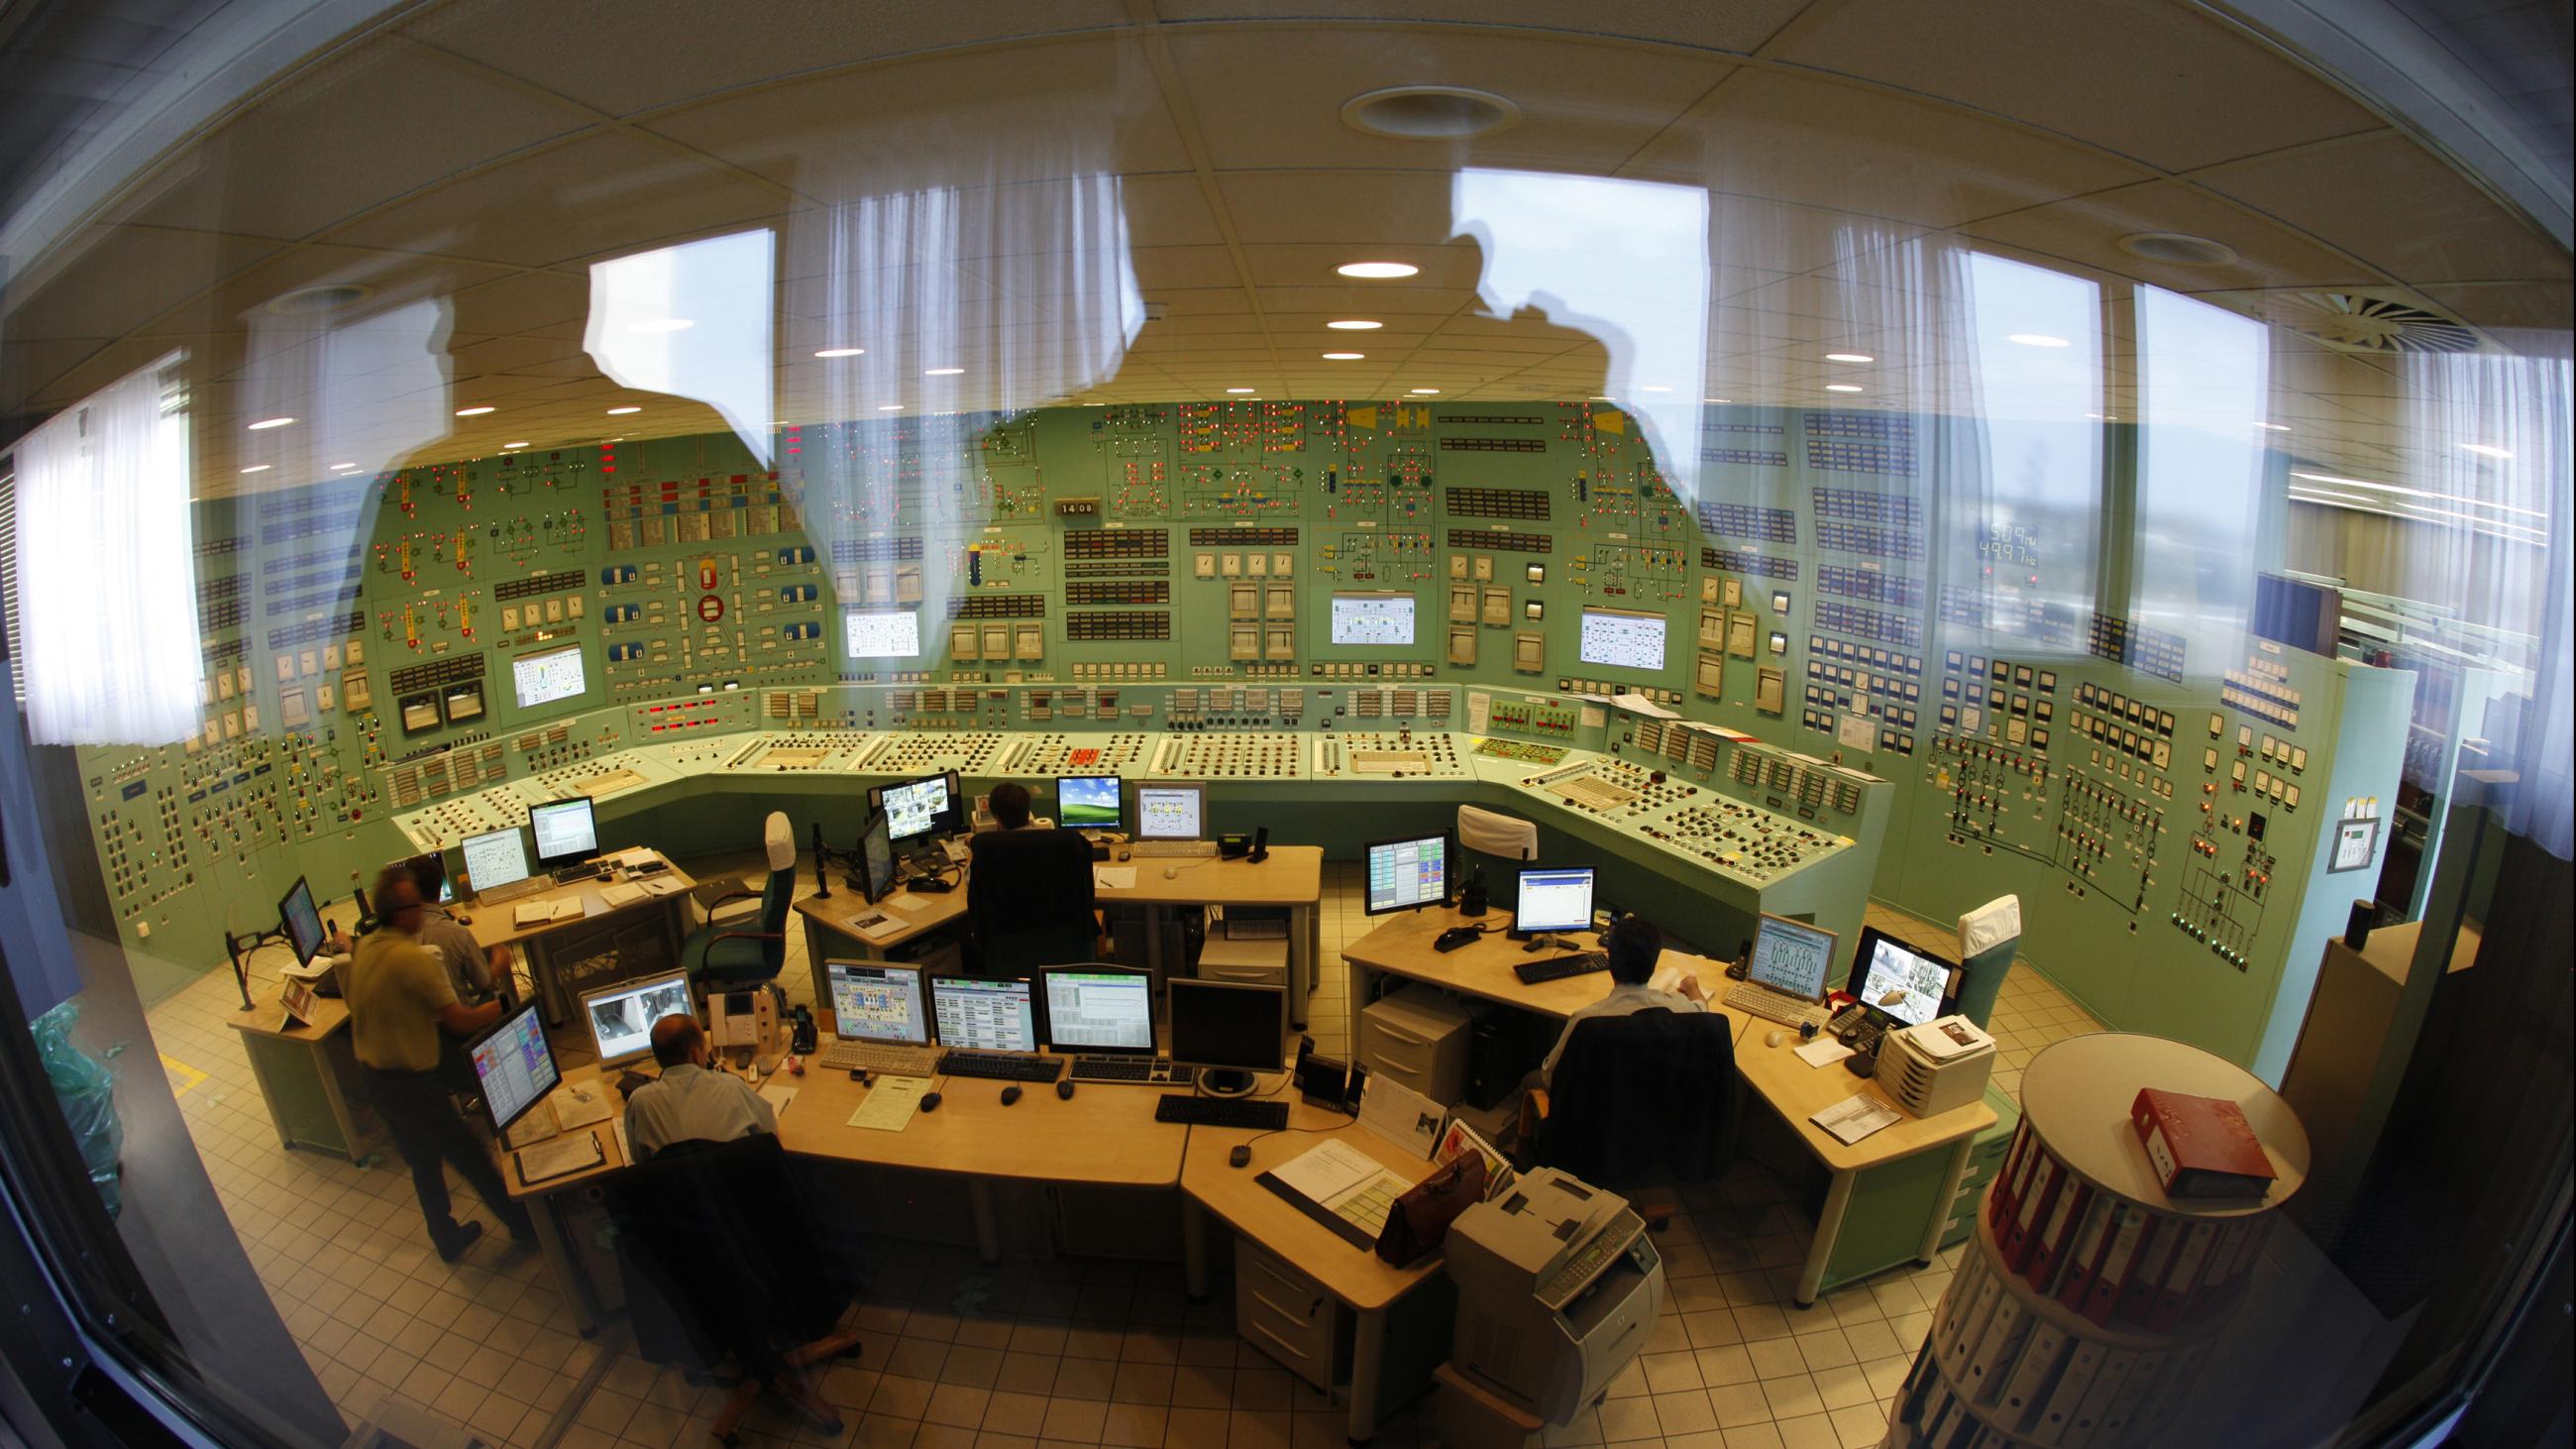 Through a large glass window, the viewer can see the silhouetted reflection of the photographer and another figure superimposed over nuclear power plant workers sitting in front of computer screens in a mint green control room the walls of which are covered in dials and knobs